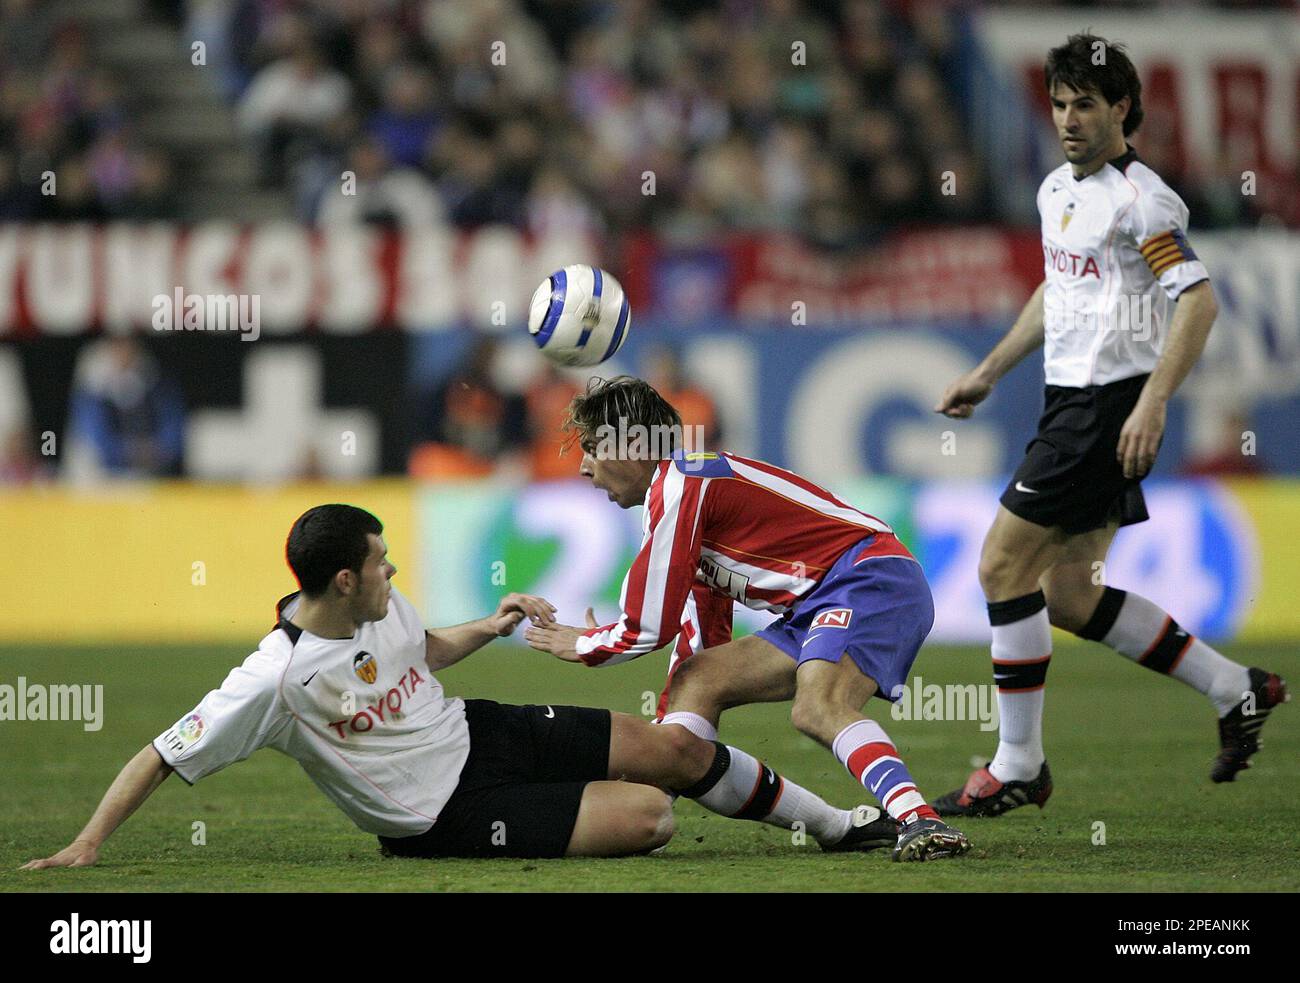 Atletico de Madrid player Richard Nunez from Uruguay, center, collides with Valencia player David Navarro Pedros from Spain, left, as Valencia team captain David Albelda Aliques from Spain, right, looks on during their Spanish league soccer match in Madrid, Sunday, March 13, 2005. Nunez had to abandon the game with a knee injury. Atletico de Madrid won the match with 1-0. (AP Photo/Jasper Juinen) ** EFE OUT ** Stock Photo